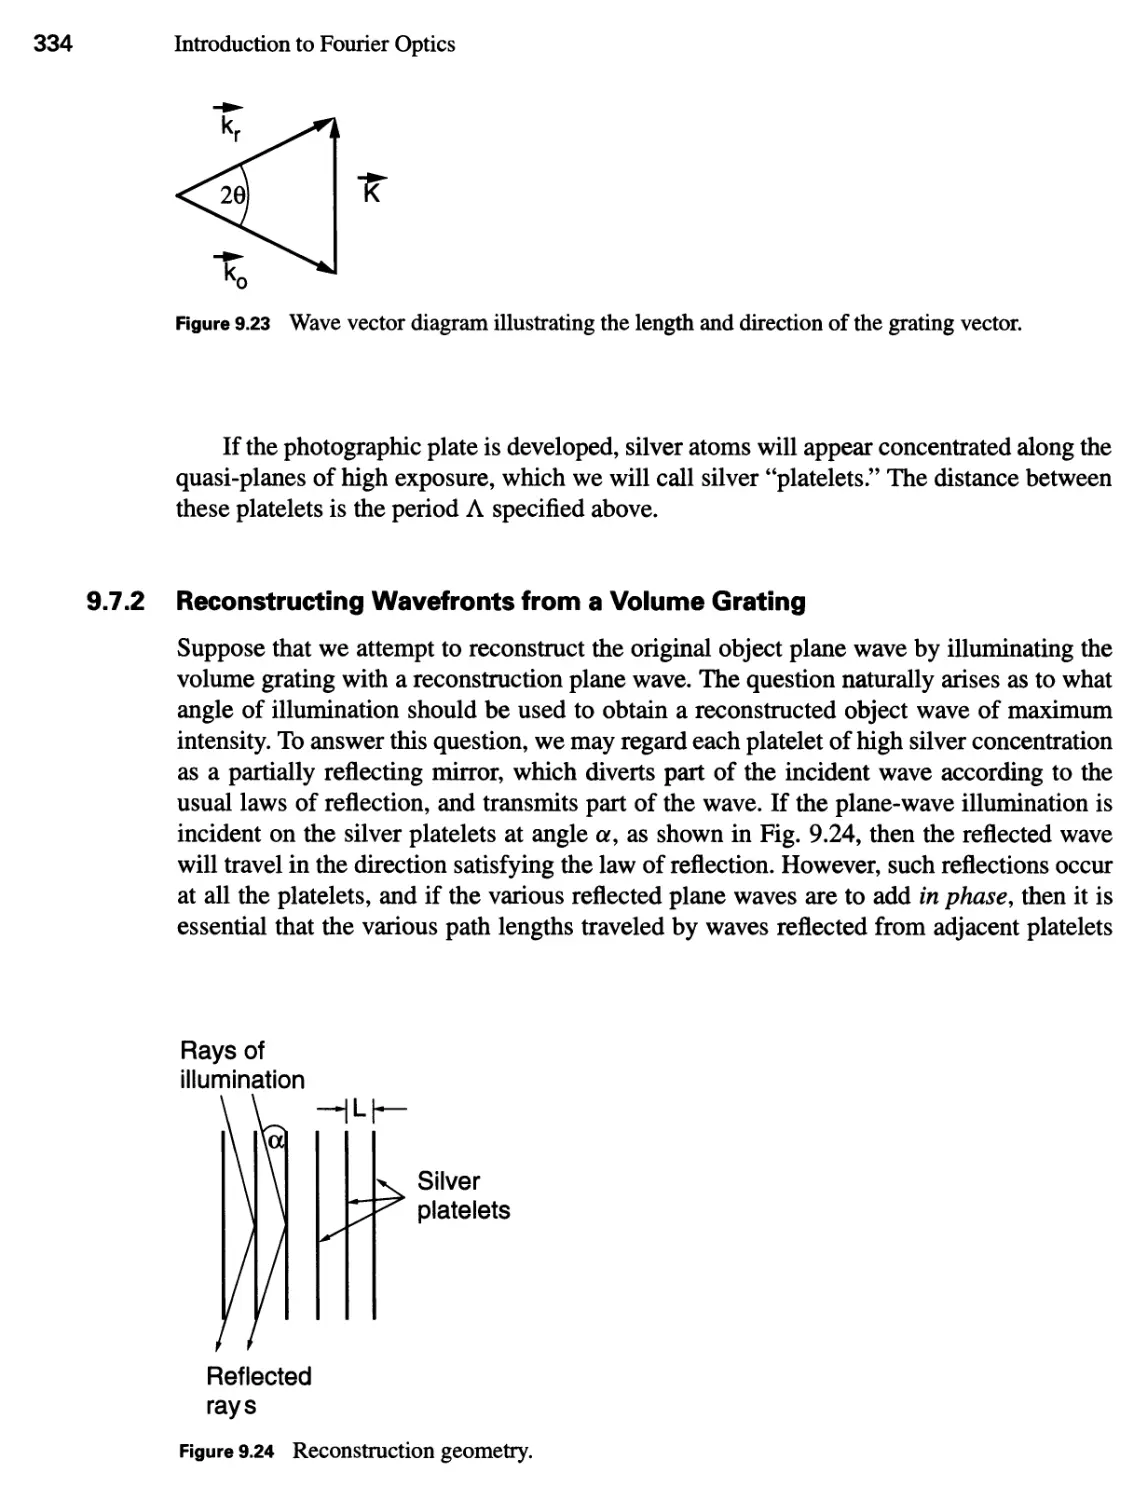 9.7.2 Reconstructing Wavefronts from a Volume Grating 334